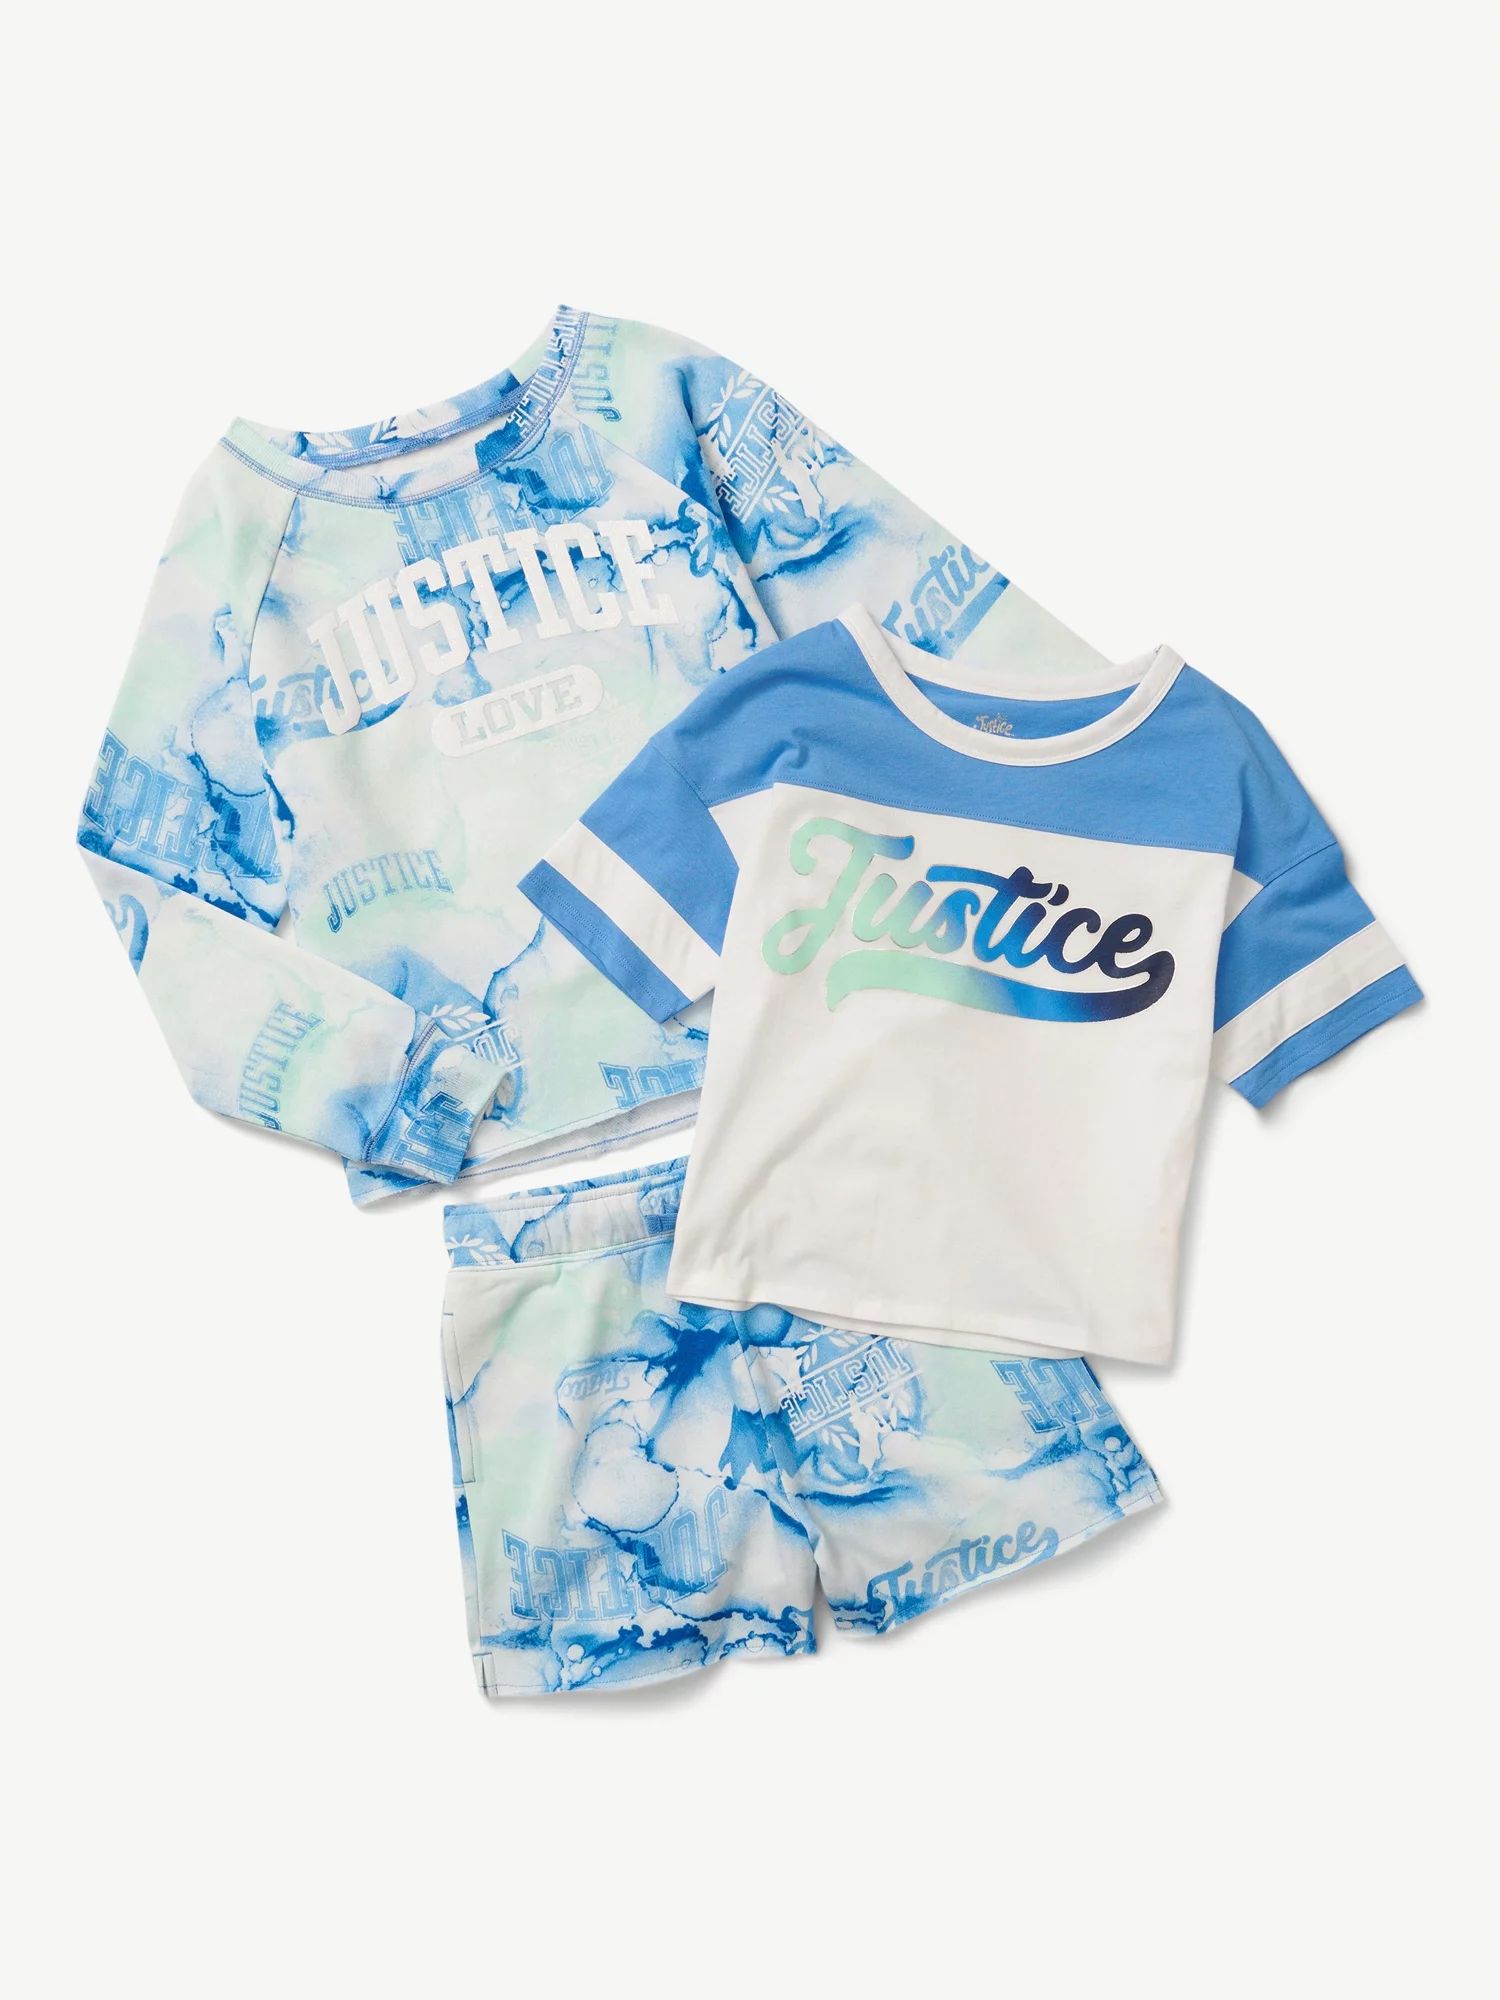 Justice Girls Everyday Faves 3-Piece Outfit Set, Sizes XS-XLP | Walmart (US)